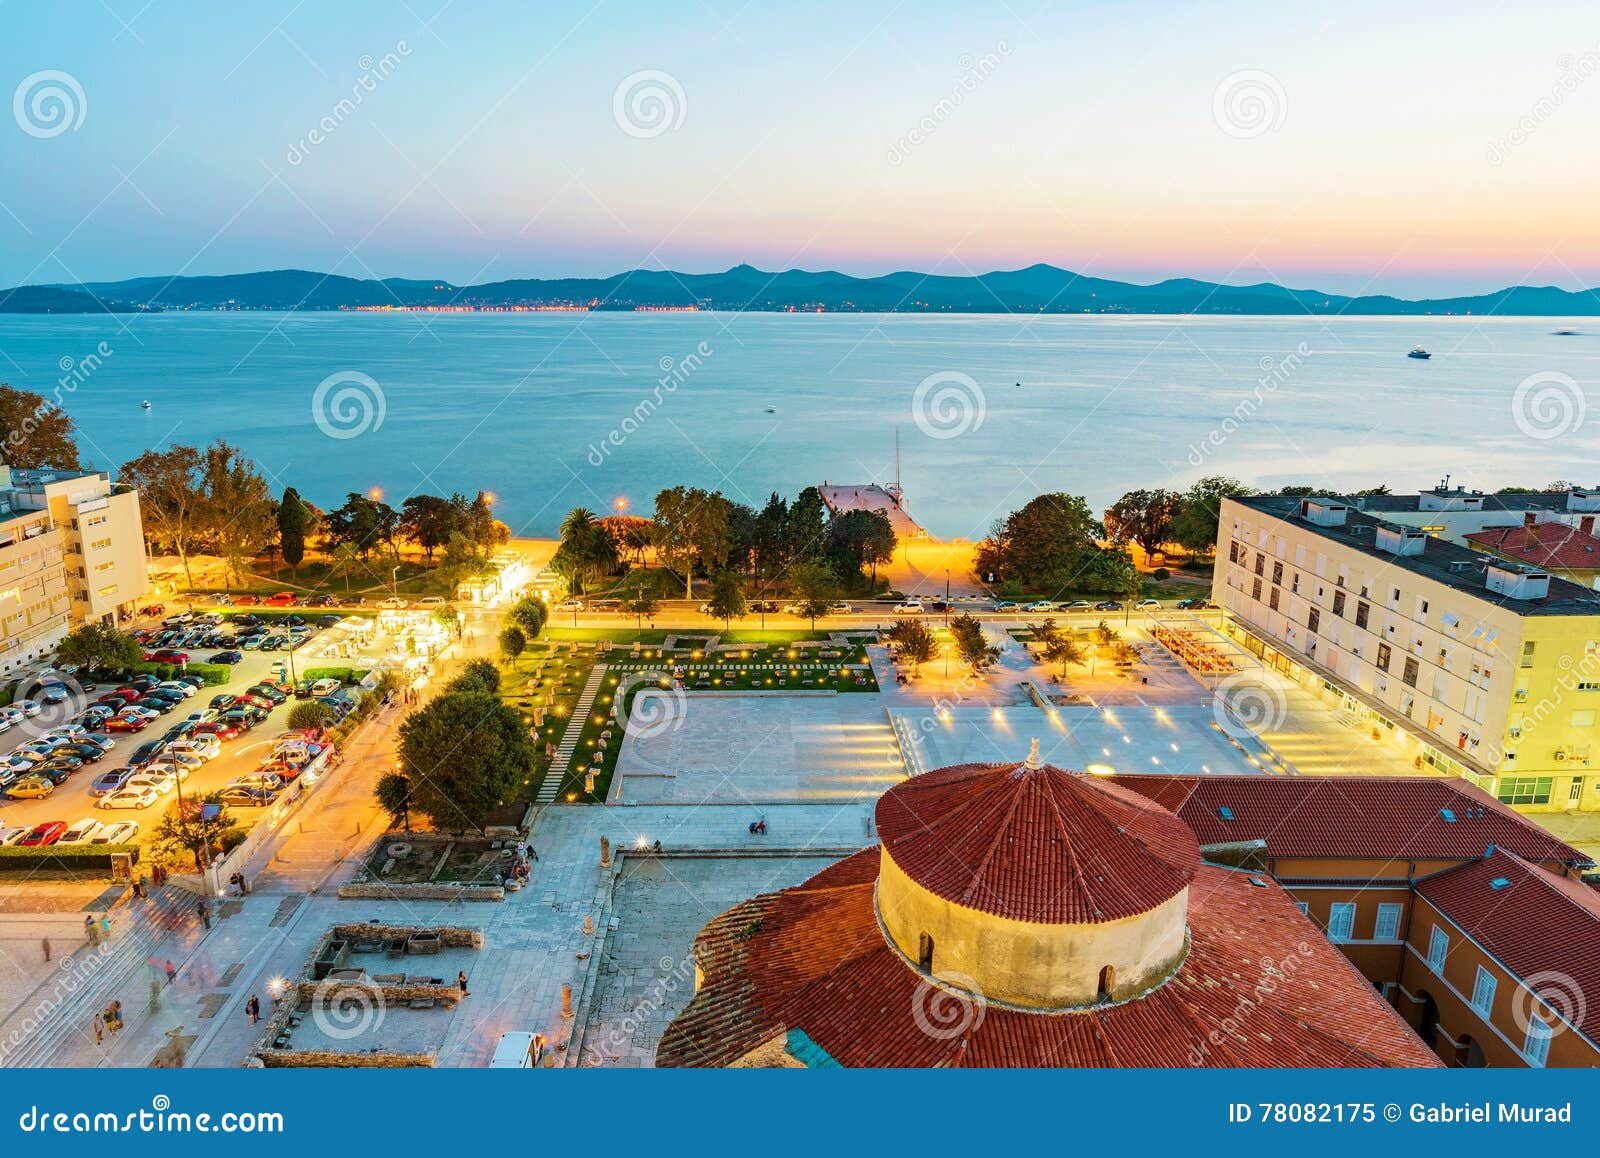 Old Town Zadar in the Evening Stock Image - Image of beautiful, ancient